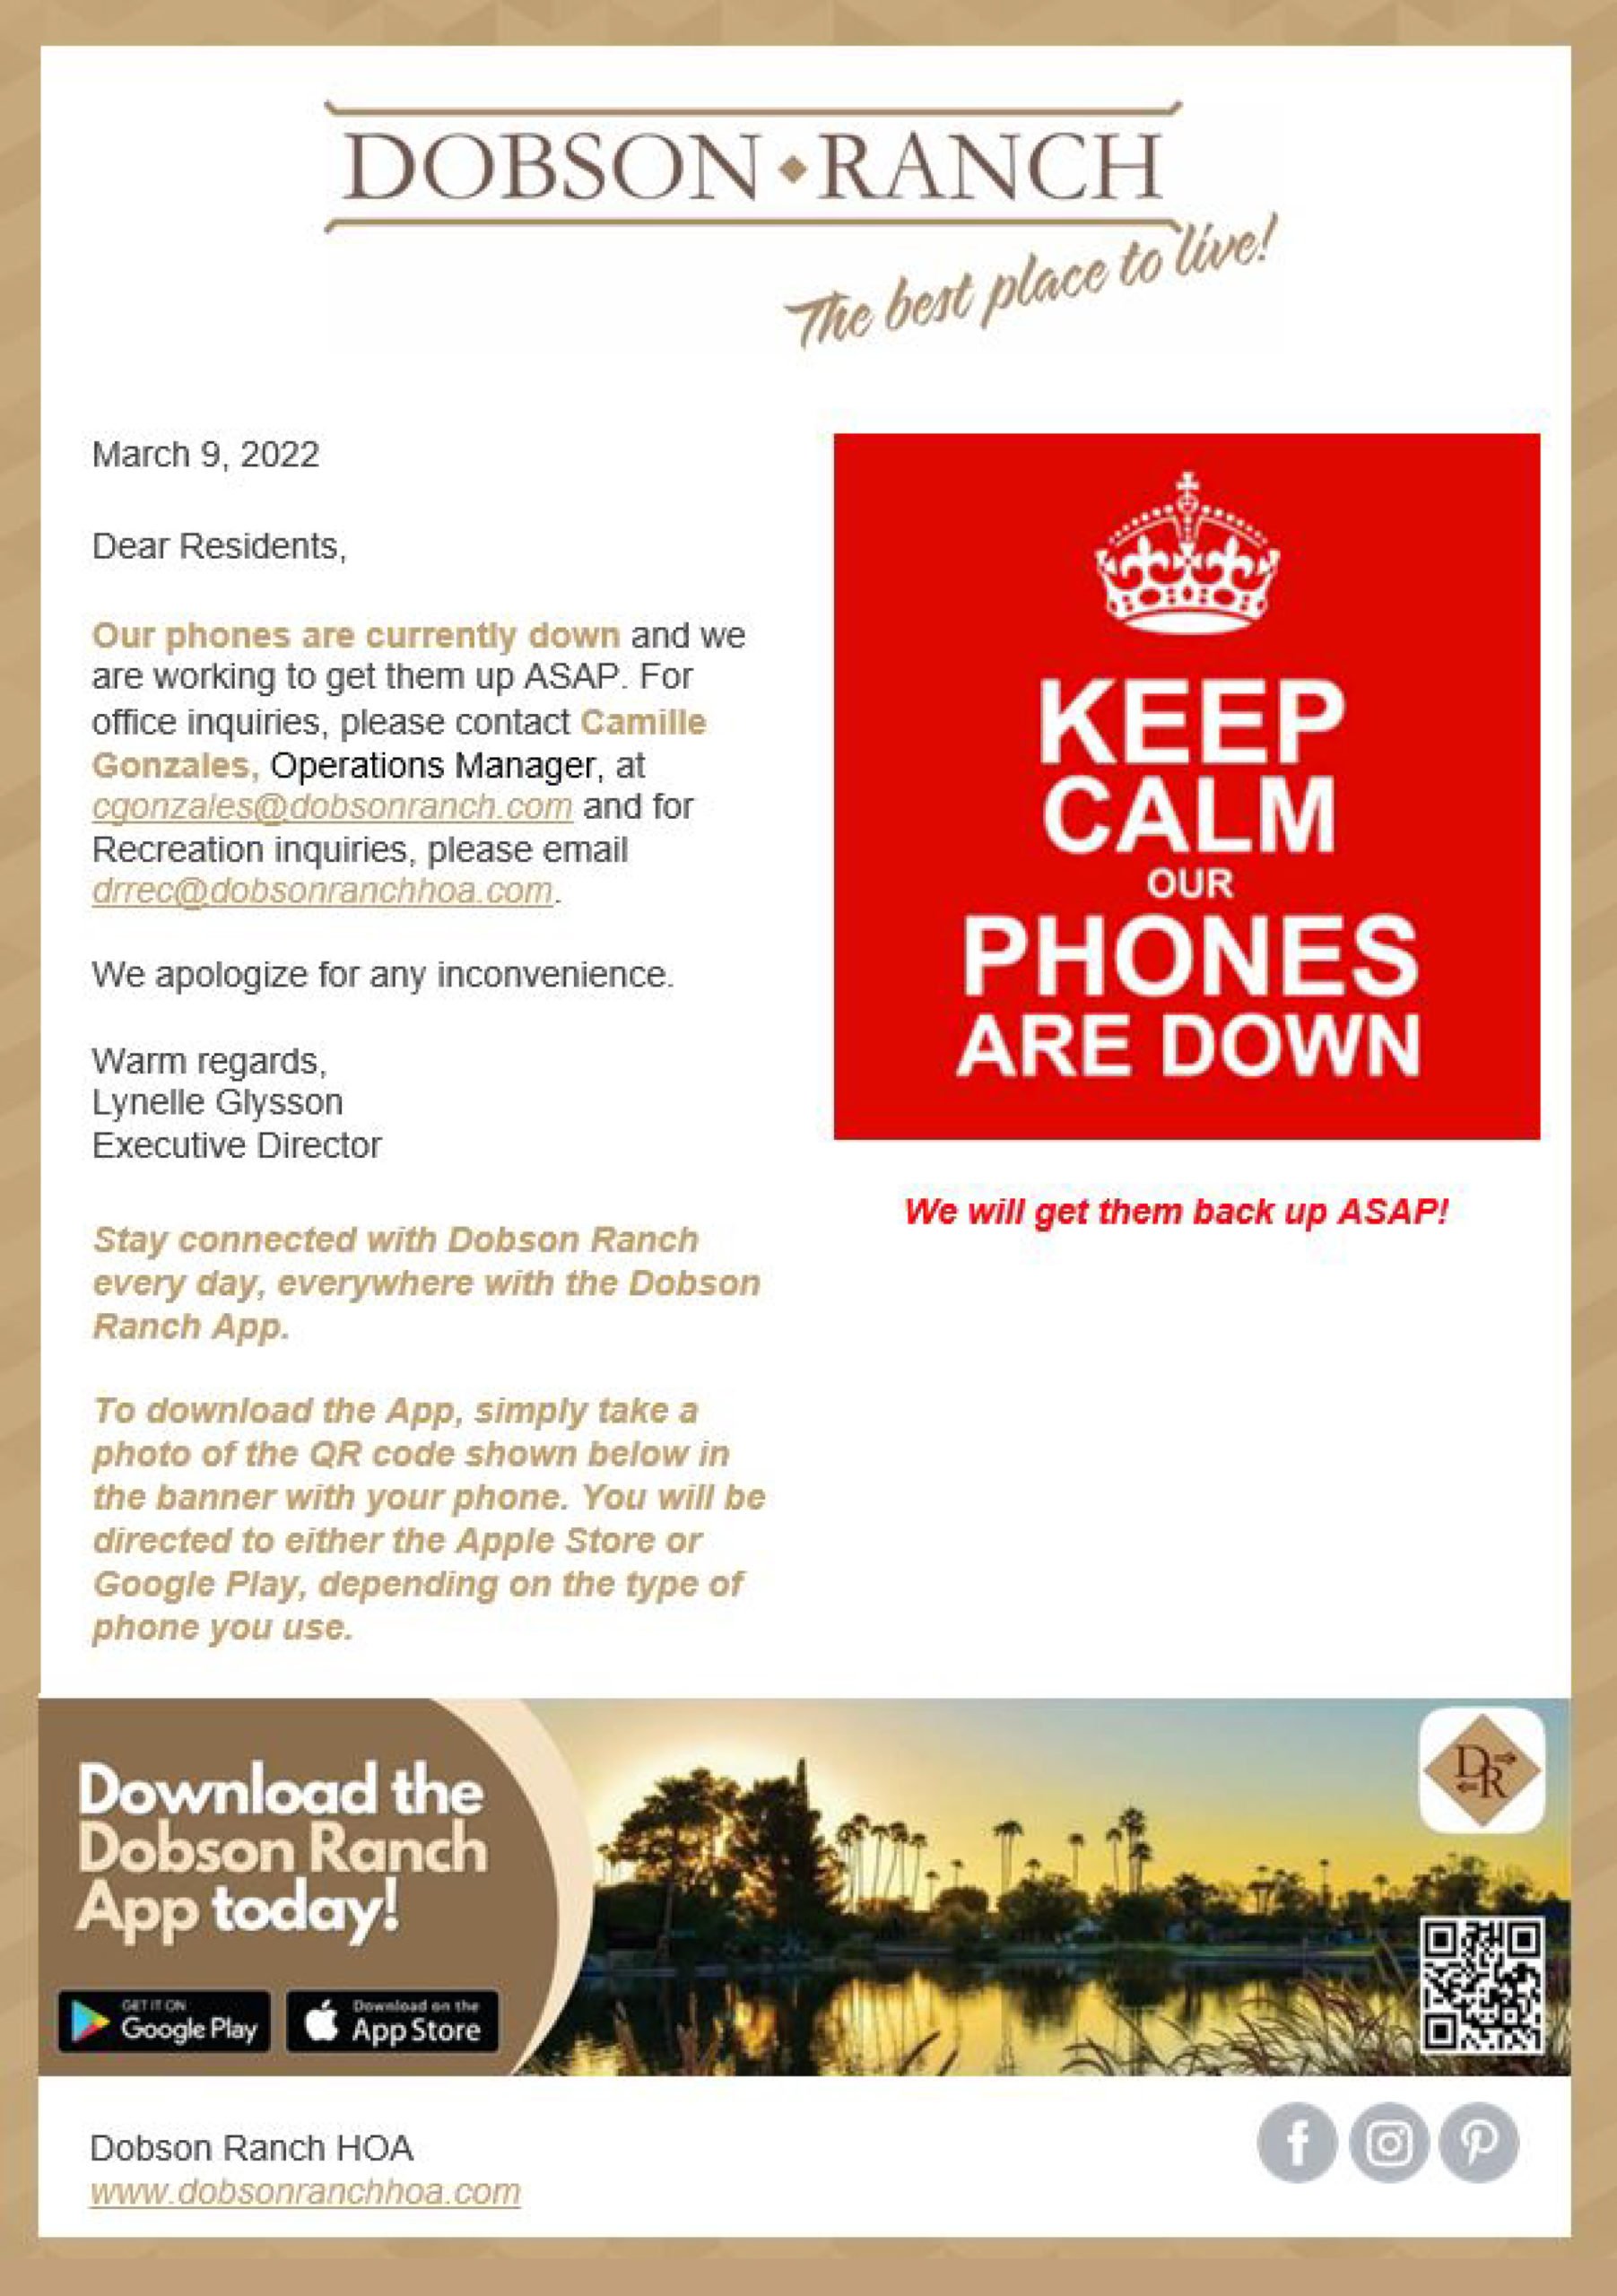 Phone Lines are Down Letter – 3-9-2022